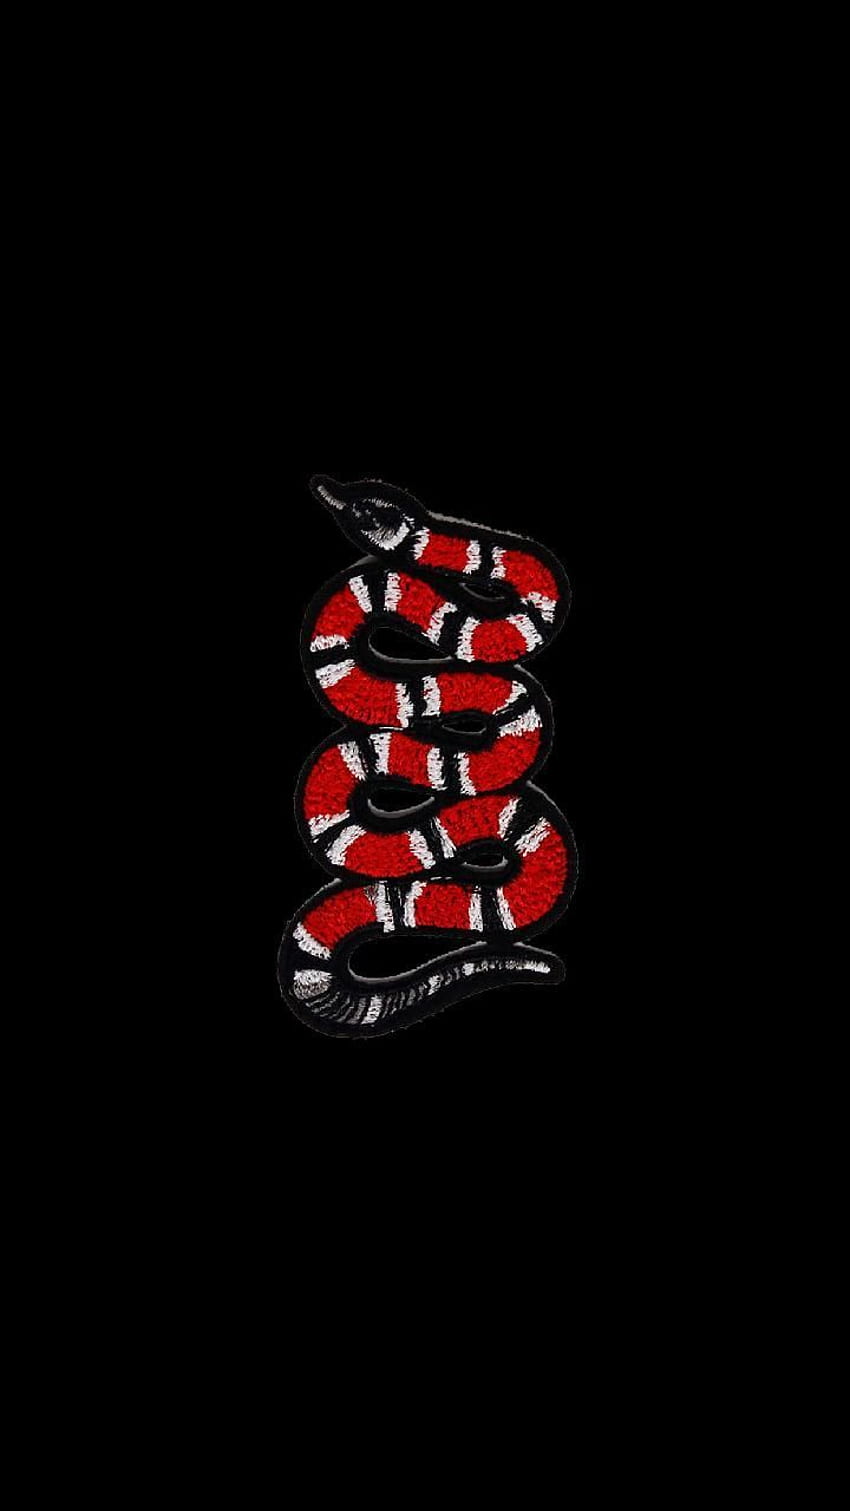 gucci by berkansevil now. Browse millions, Viper Snake iPhone HD phone wallpaper